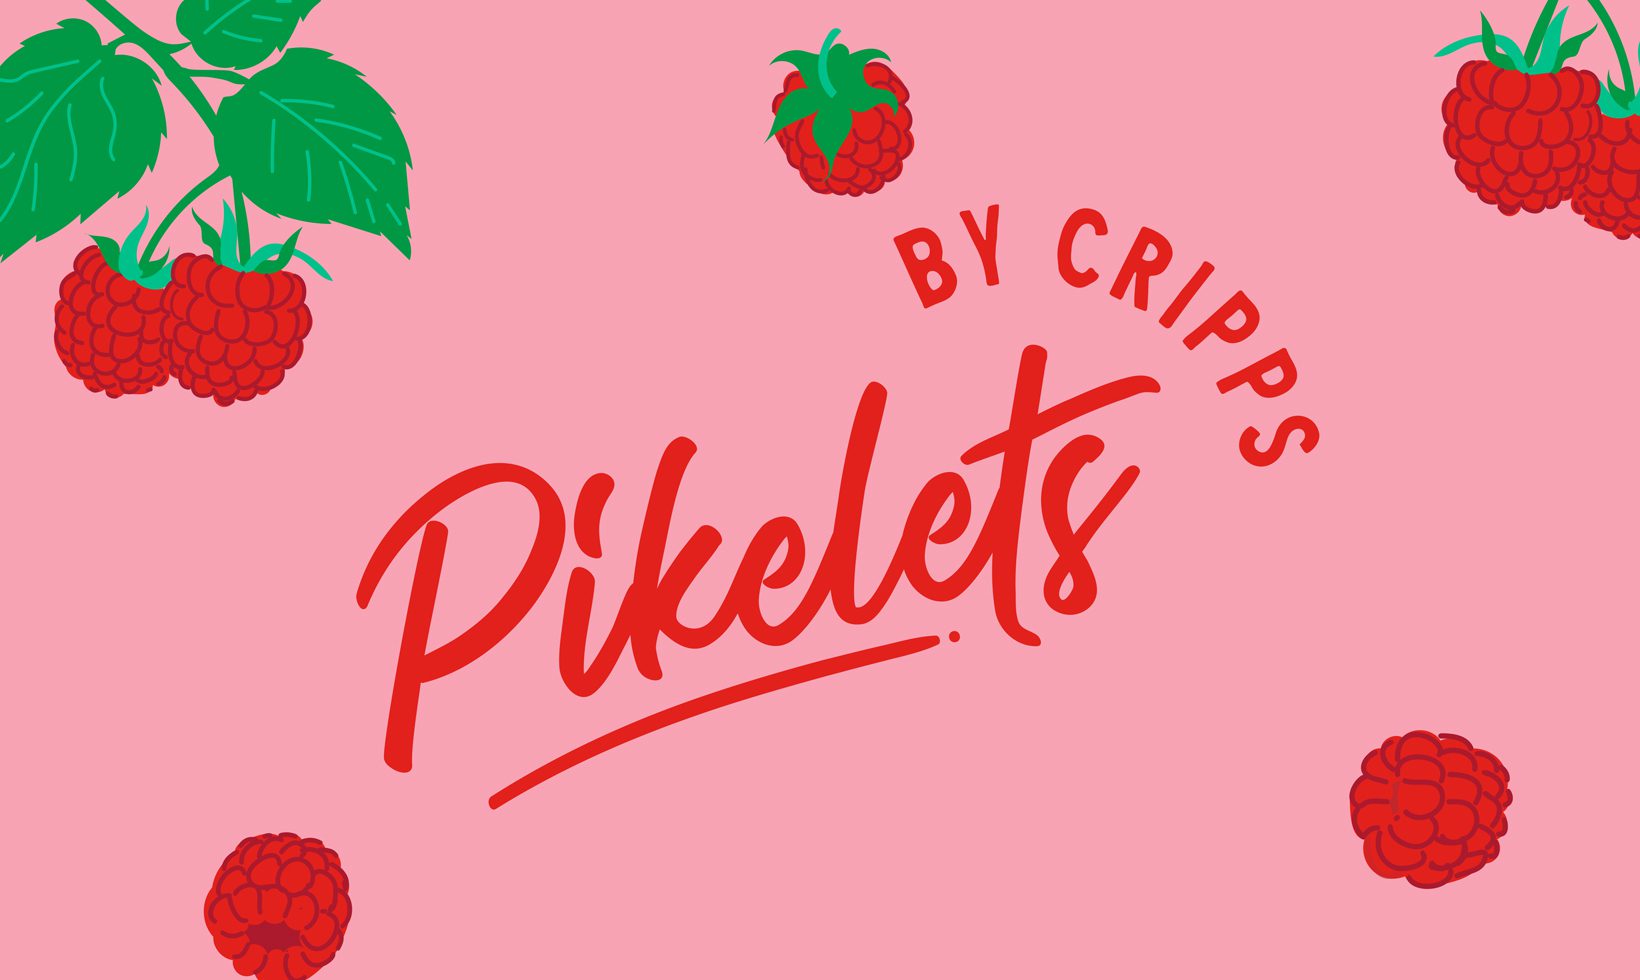 Pikelets by Cripps